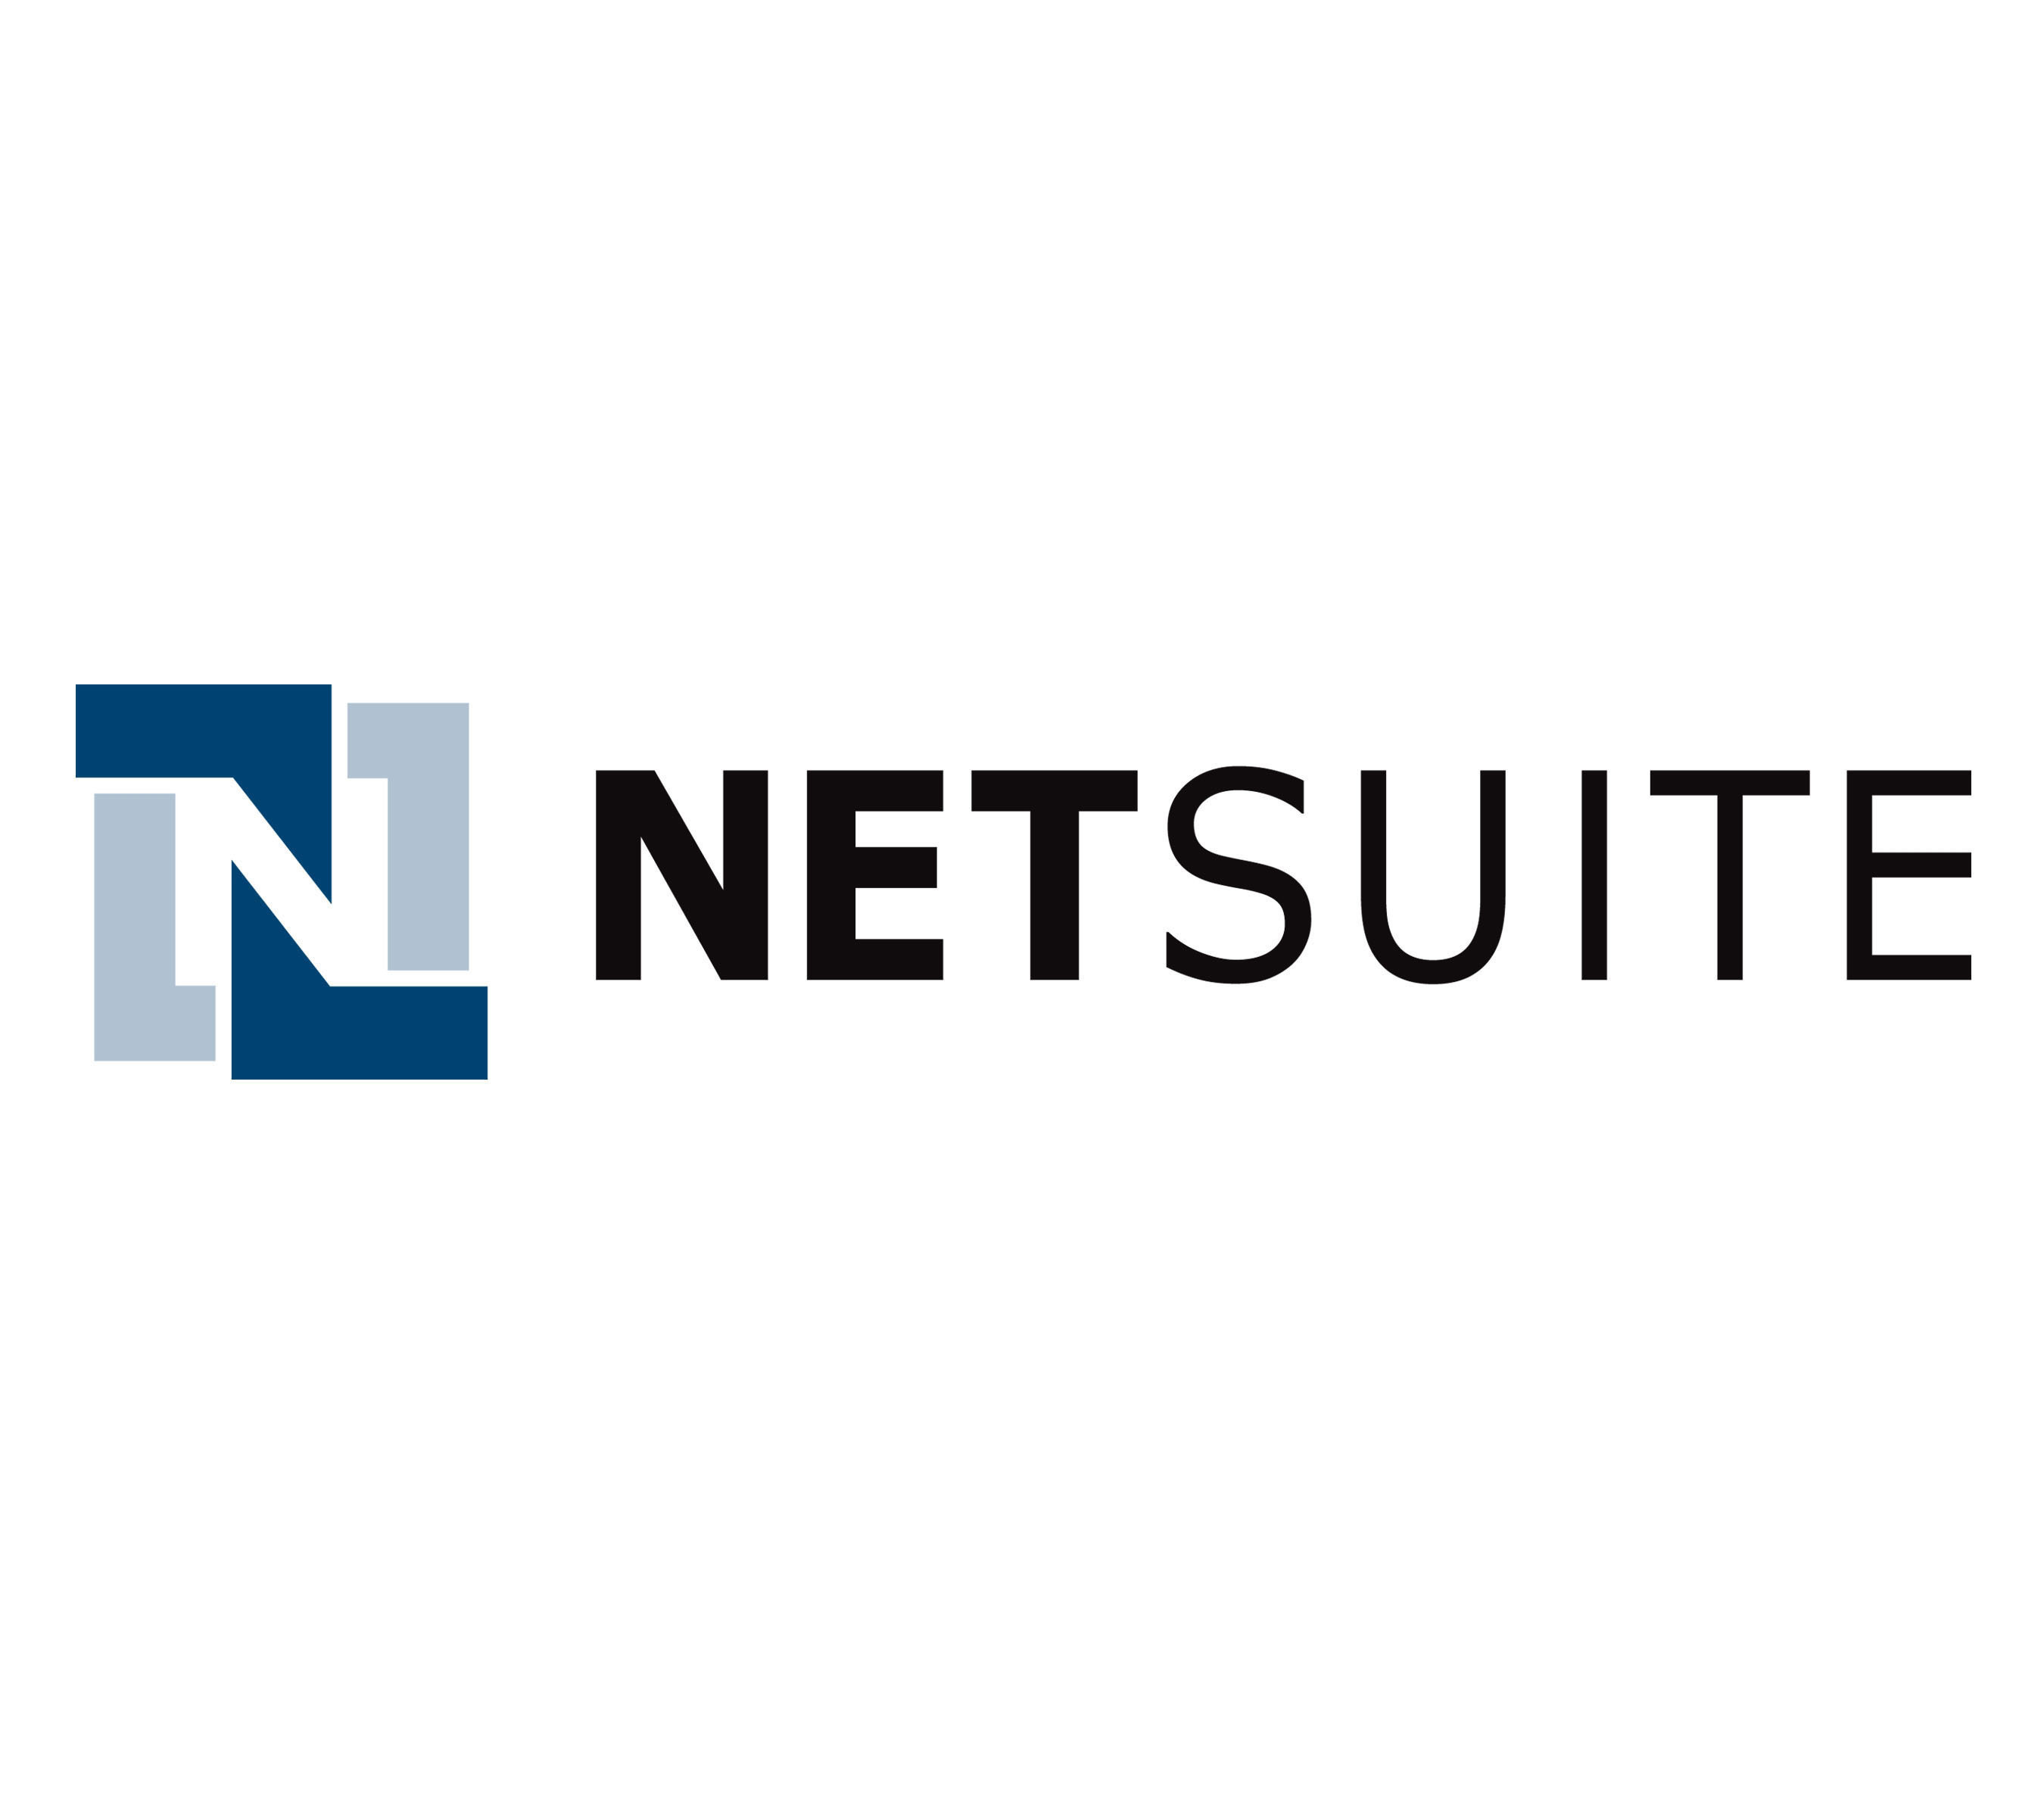 NetSuite. Where Business is Going